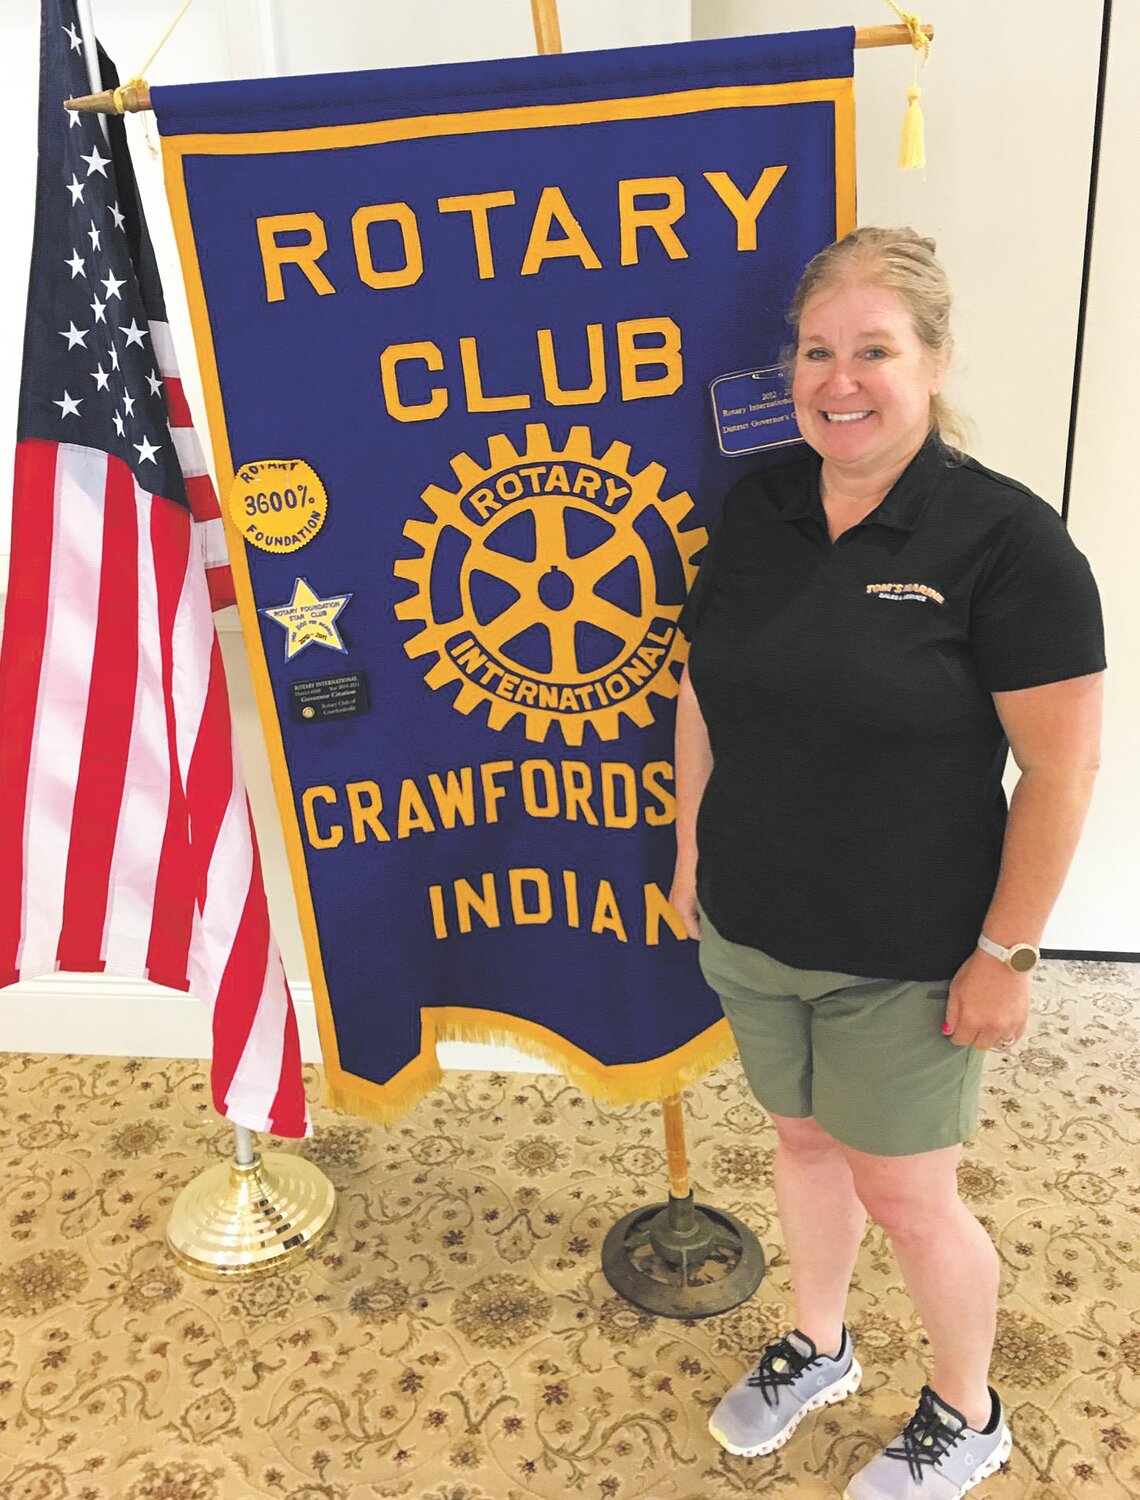 Lori Shaver, owner of Ironman Raceway located near C.R. 200 and State Road 47, spoke to the Crawfordsville Rotary Club. She said the first race was held in 1996. The race was cross country and had ATVS and bikes racing for the prizes. August and October are the months with the largest races. In October, the Ironman Race draws racers from all across the United States. A visit to the raceway is a great way to spend time in the outdoors and enjoy the races.